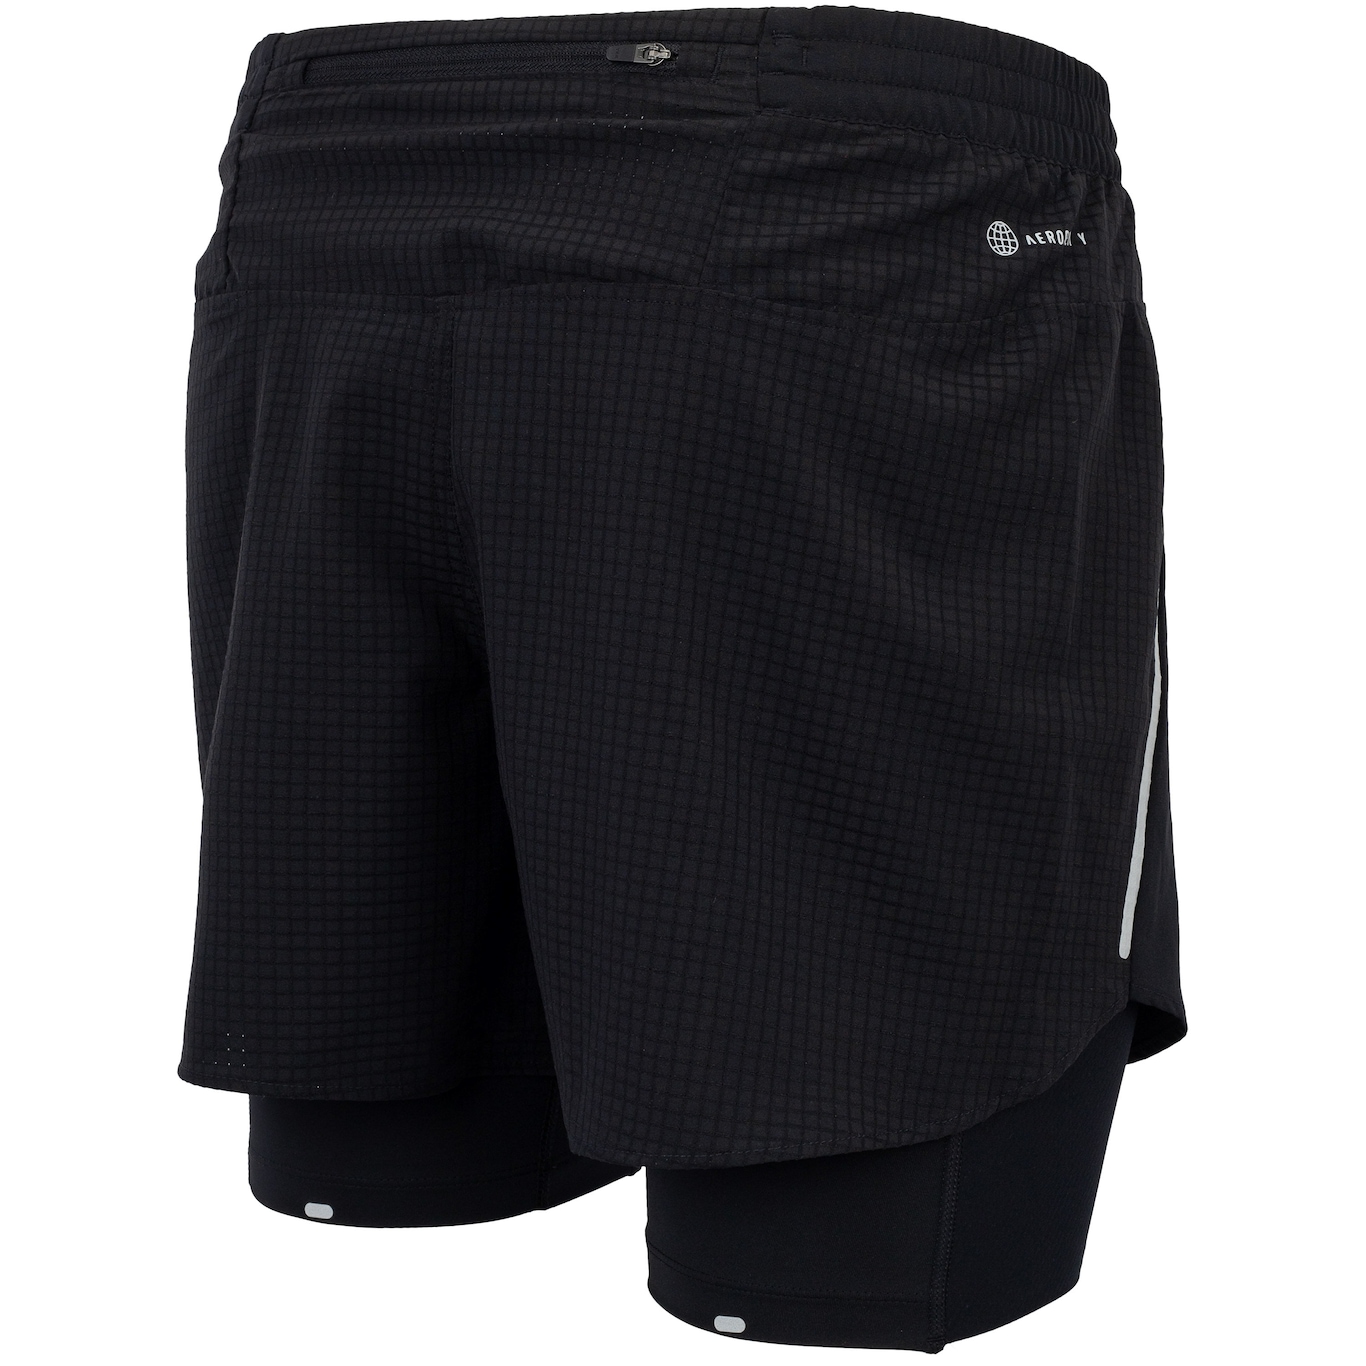 Size XL- Adidas Men's Designed 4 Running Two-in-one Shorts, Black. 